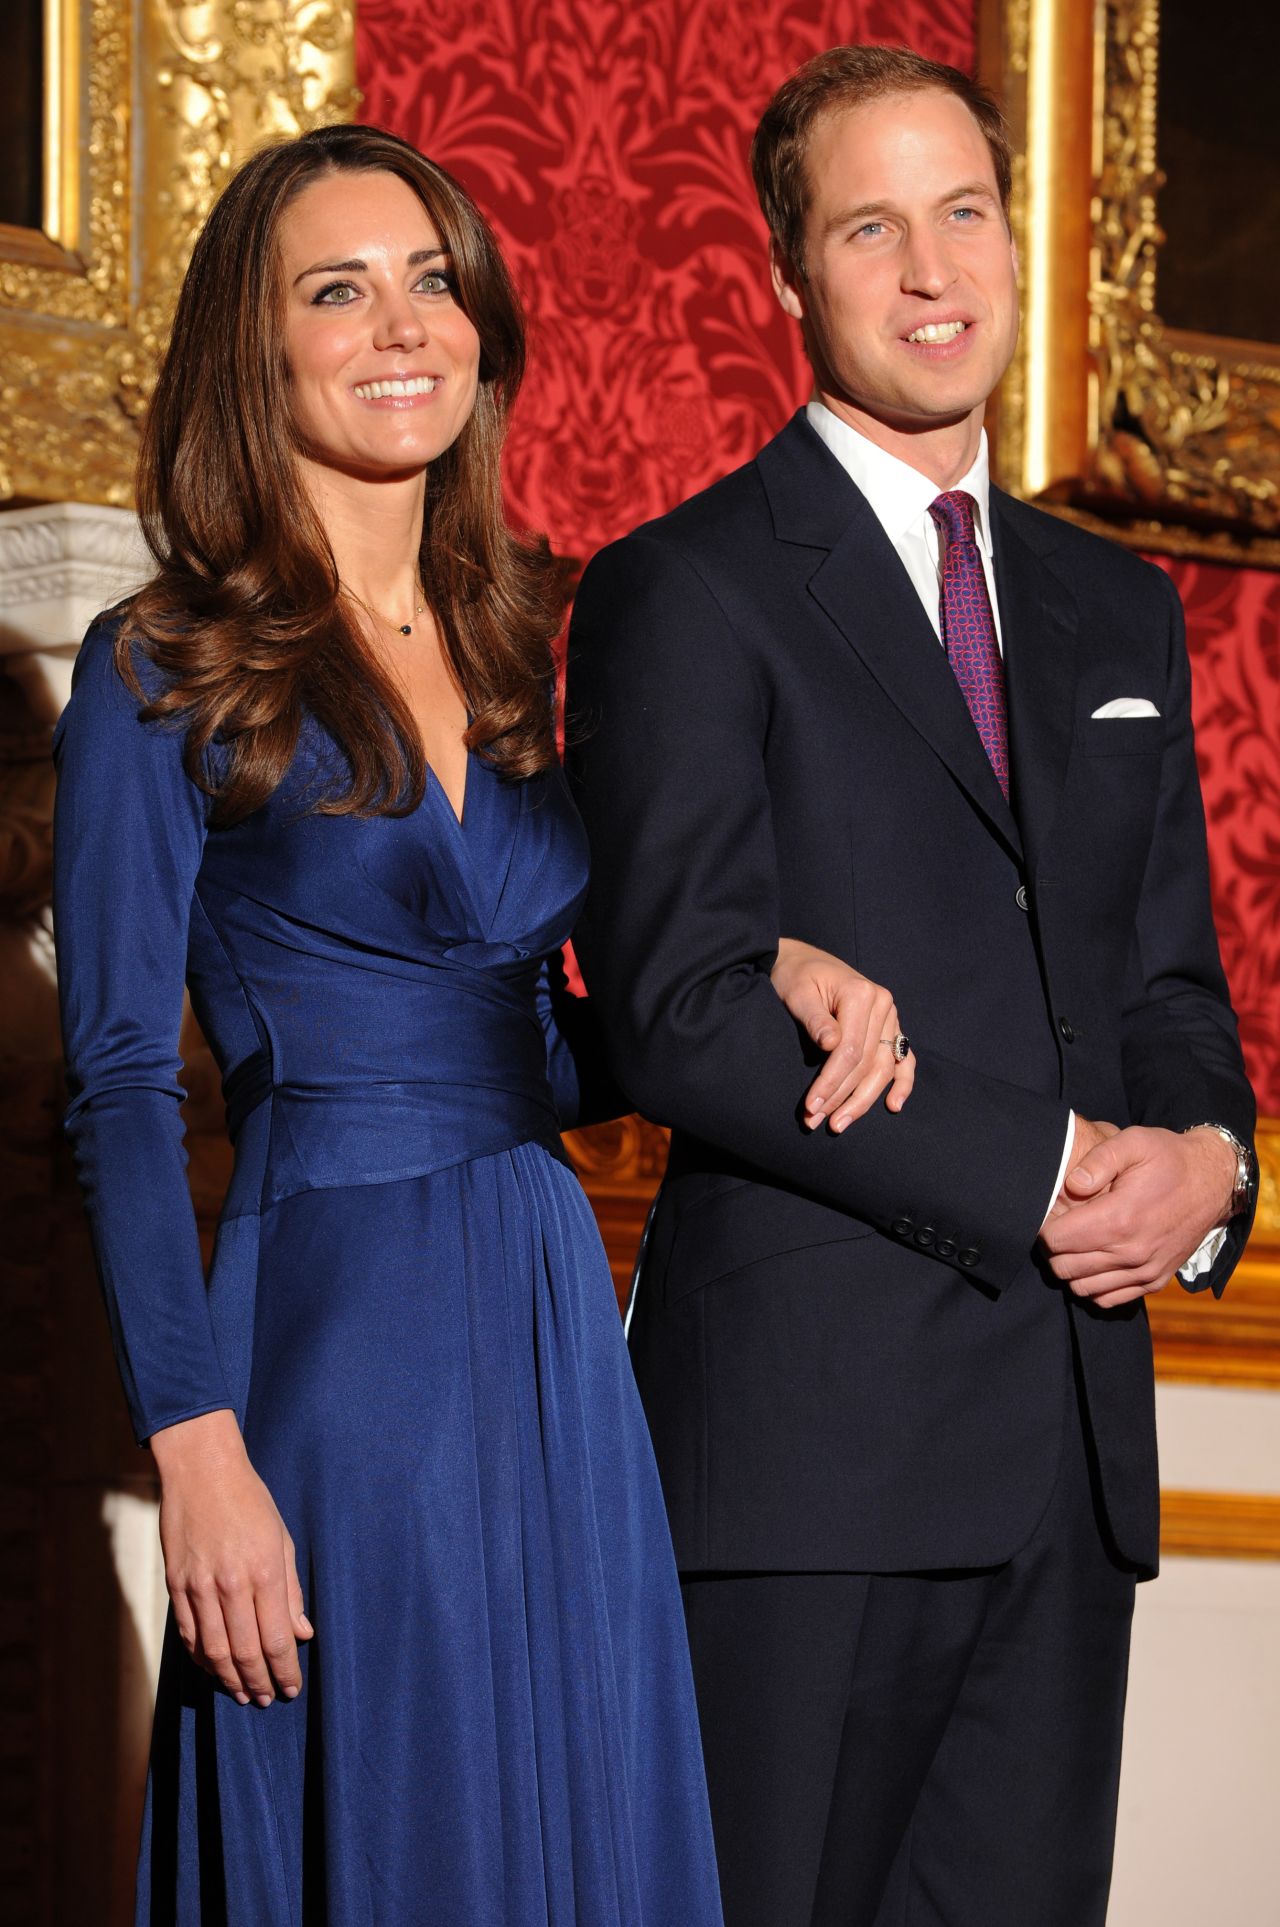 Prince William and the former Kate Middleton got engaged <a href="http://www.cnn.com/2010/WORLD/asiapcf/11/19/kenya.royal.proposal/index.html">while hiking in Kenya in 2010. </a>He presented her with his mother, Princess Diana's, famed engagement ring.